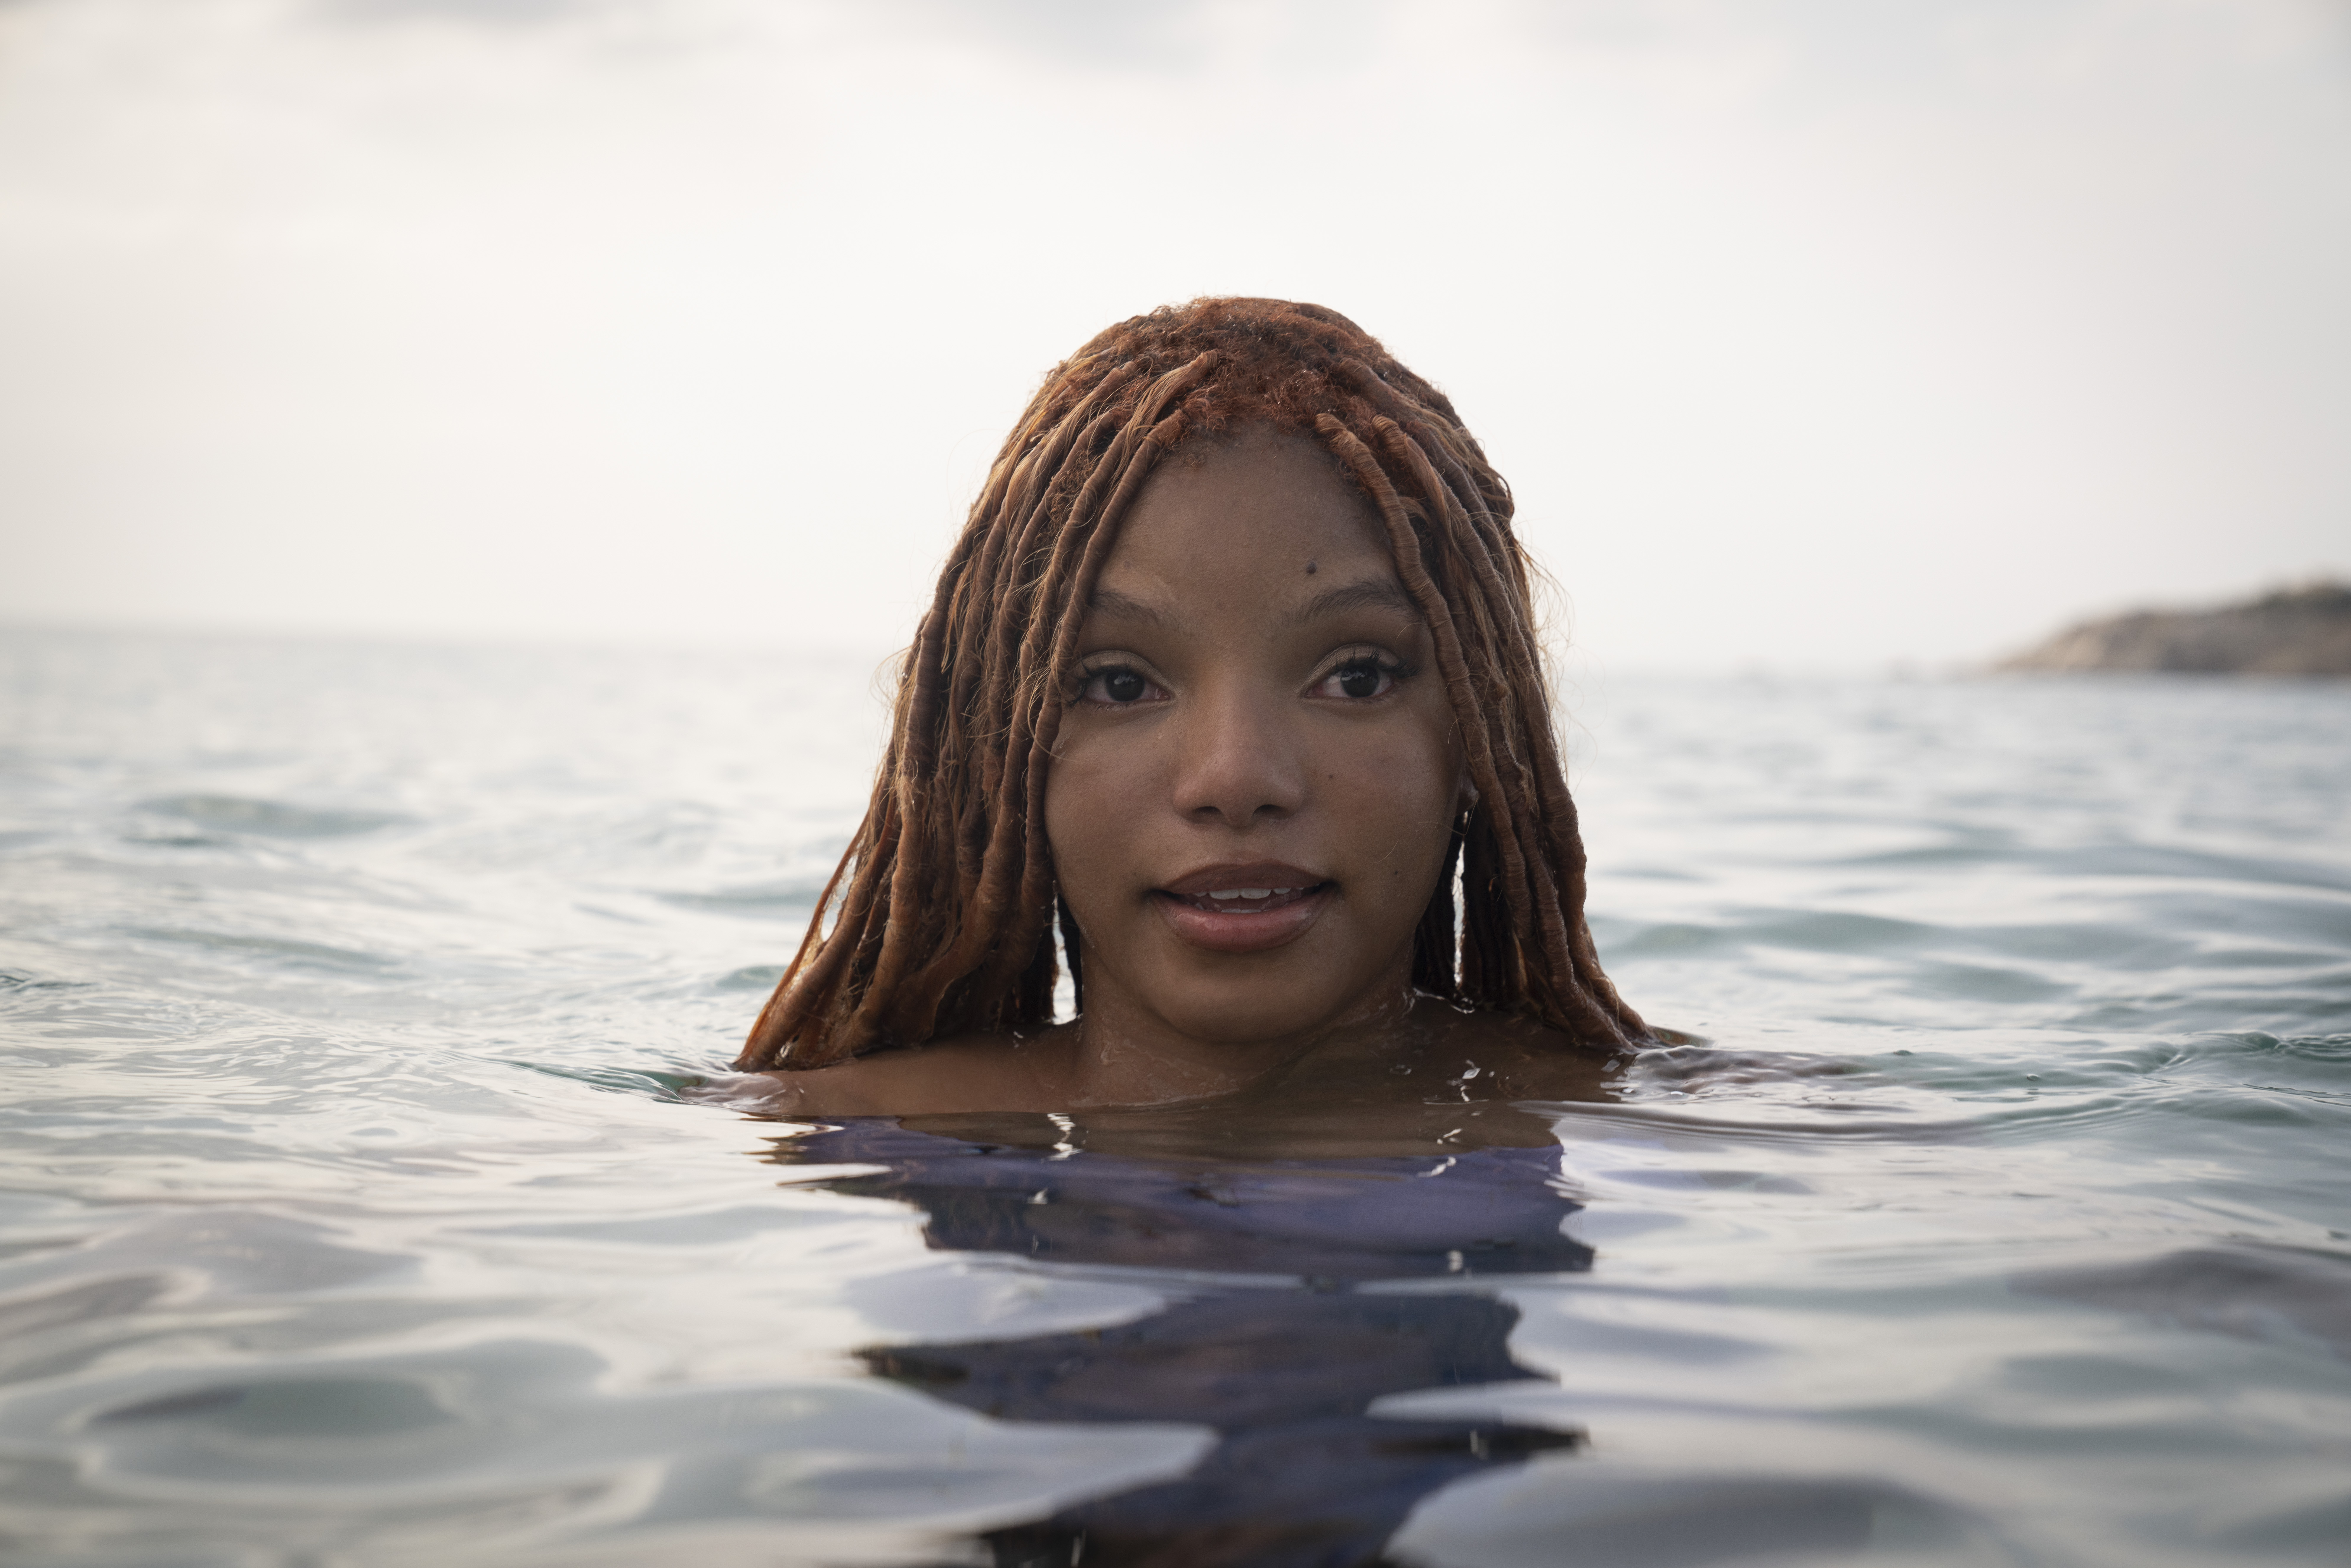 Disney’s ‘The Little Mermaid’ starring Black actress Halle Bailey opens with fanfare, but also caps a history of misogynoir